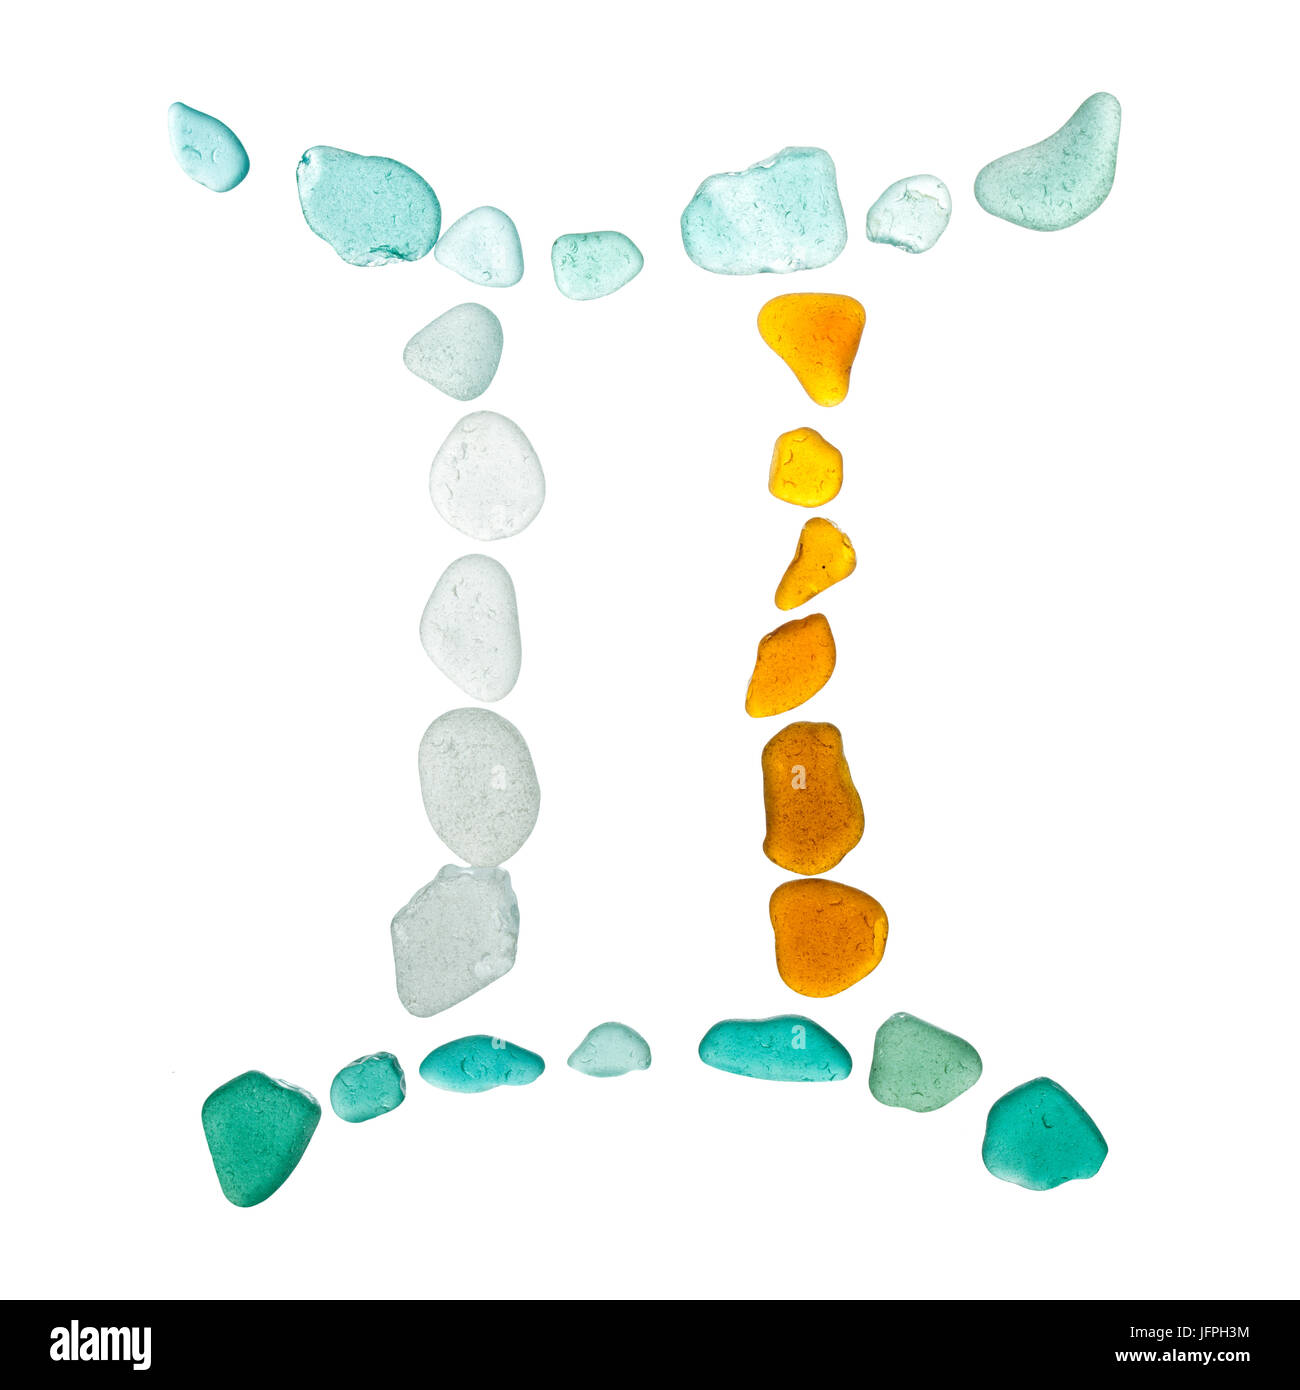 sea glass astrological sign, Gemini, on white background Stock Photo